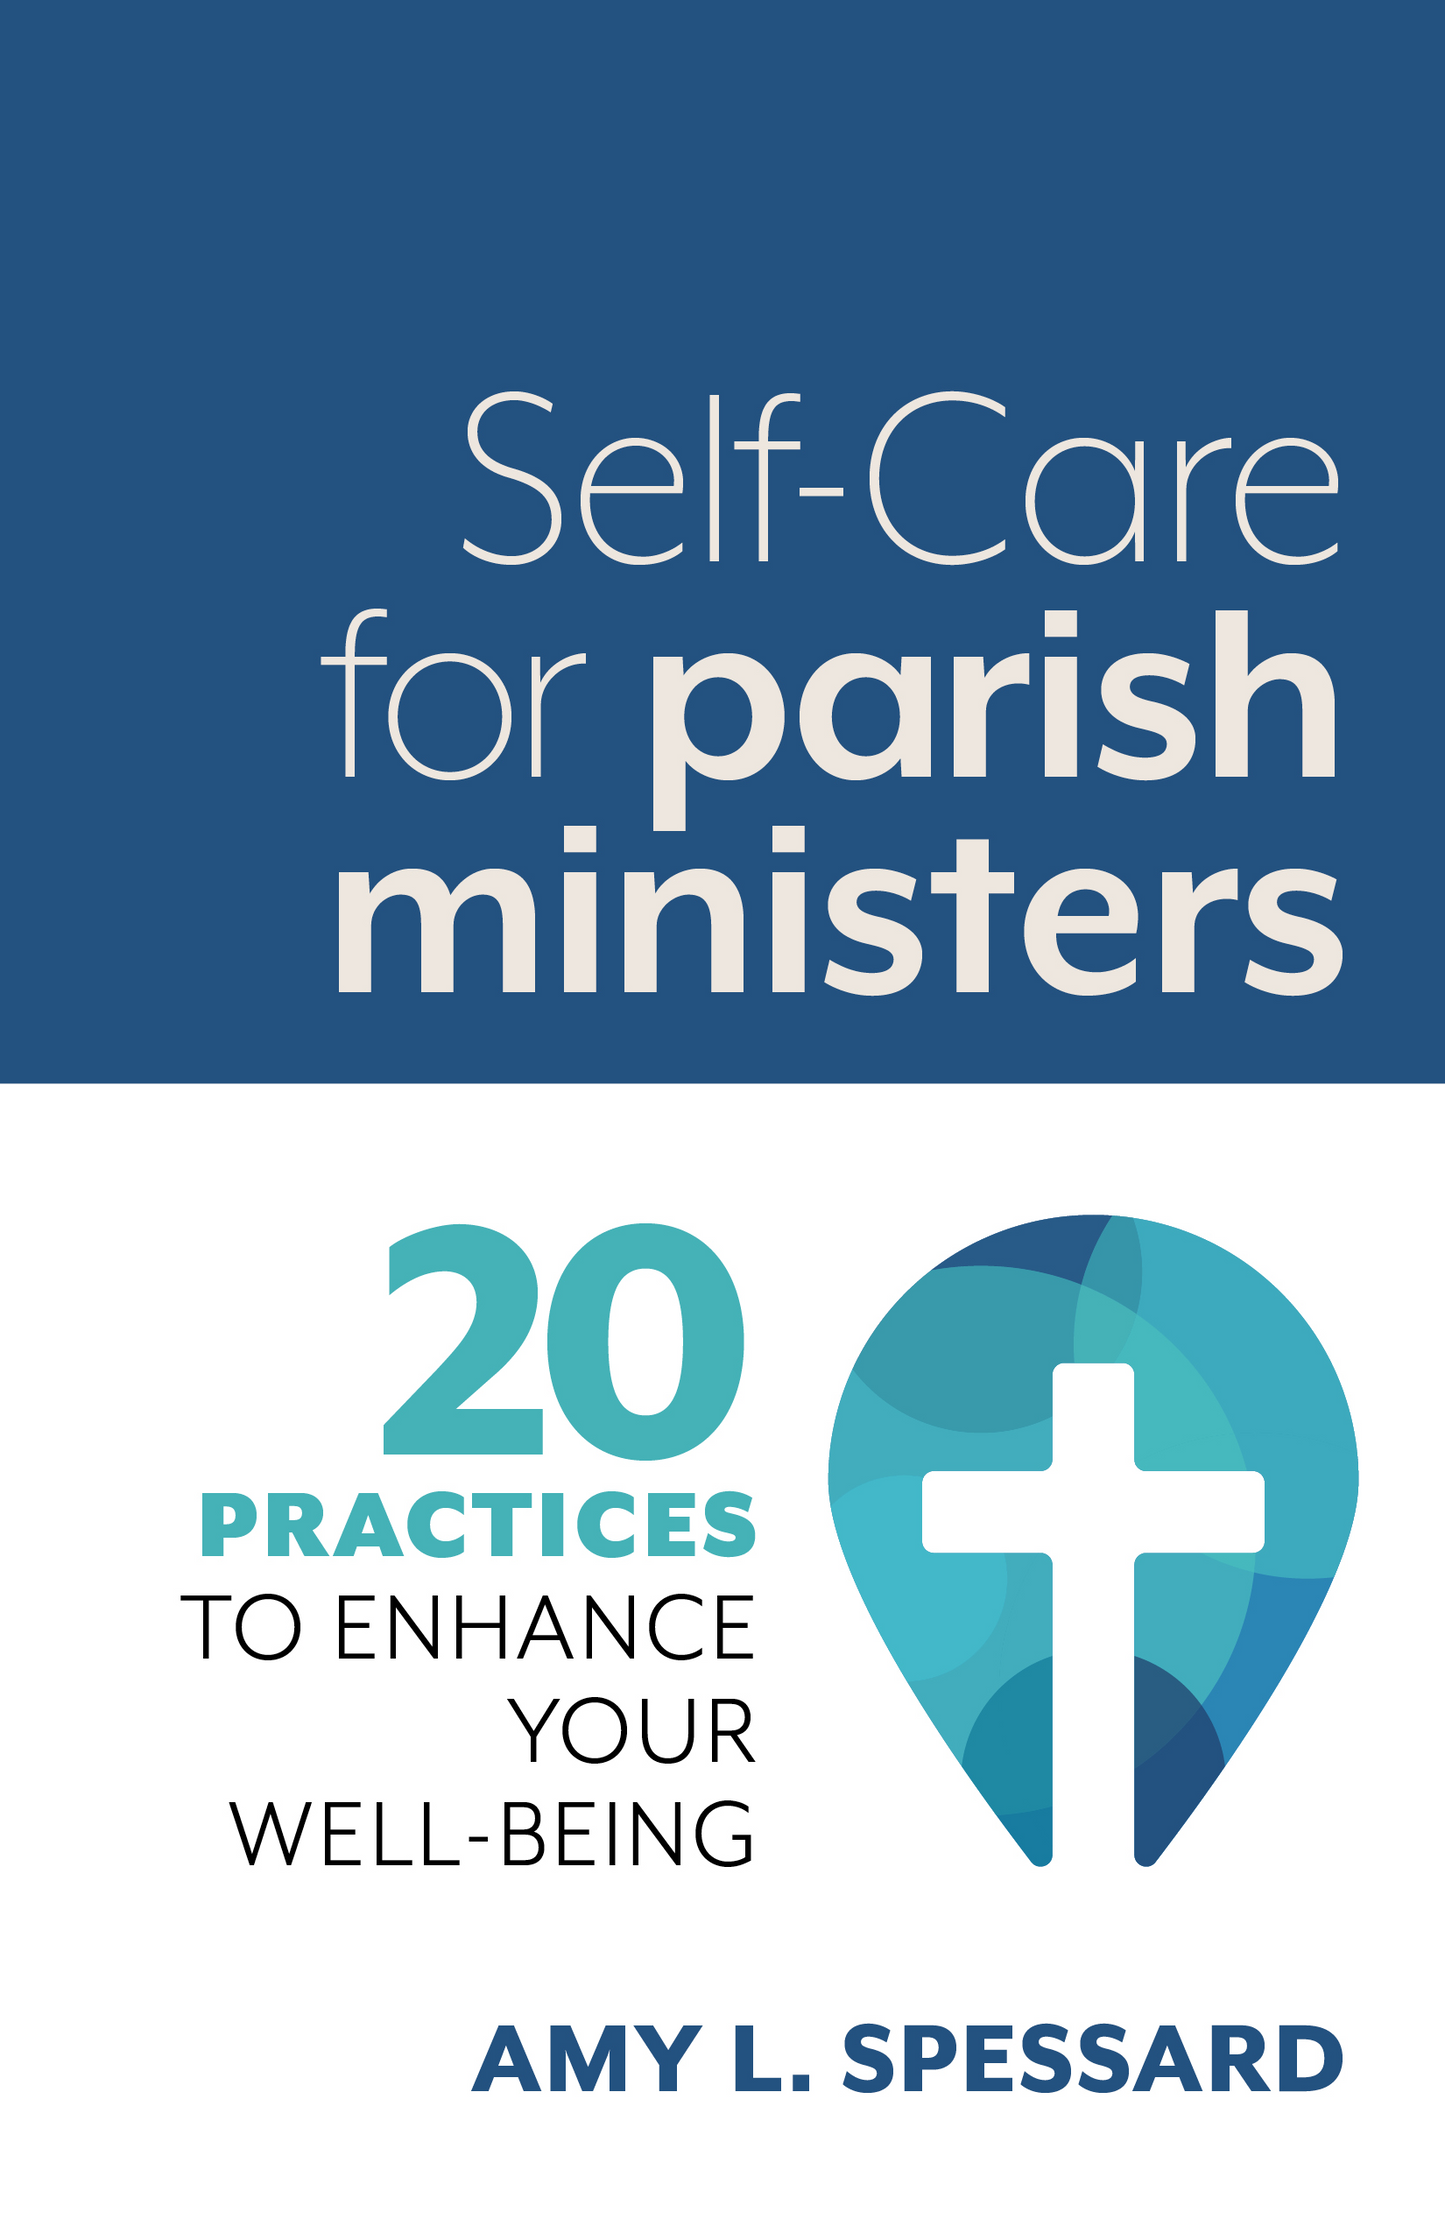 SALE - Self-Care for Parish Ministers